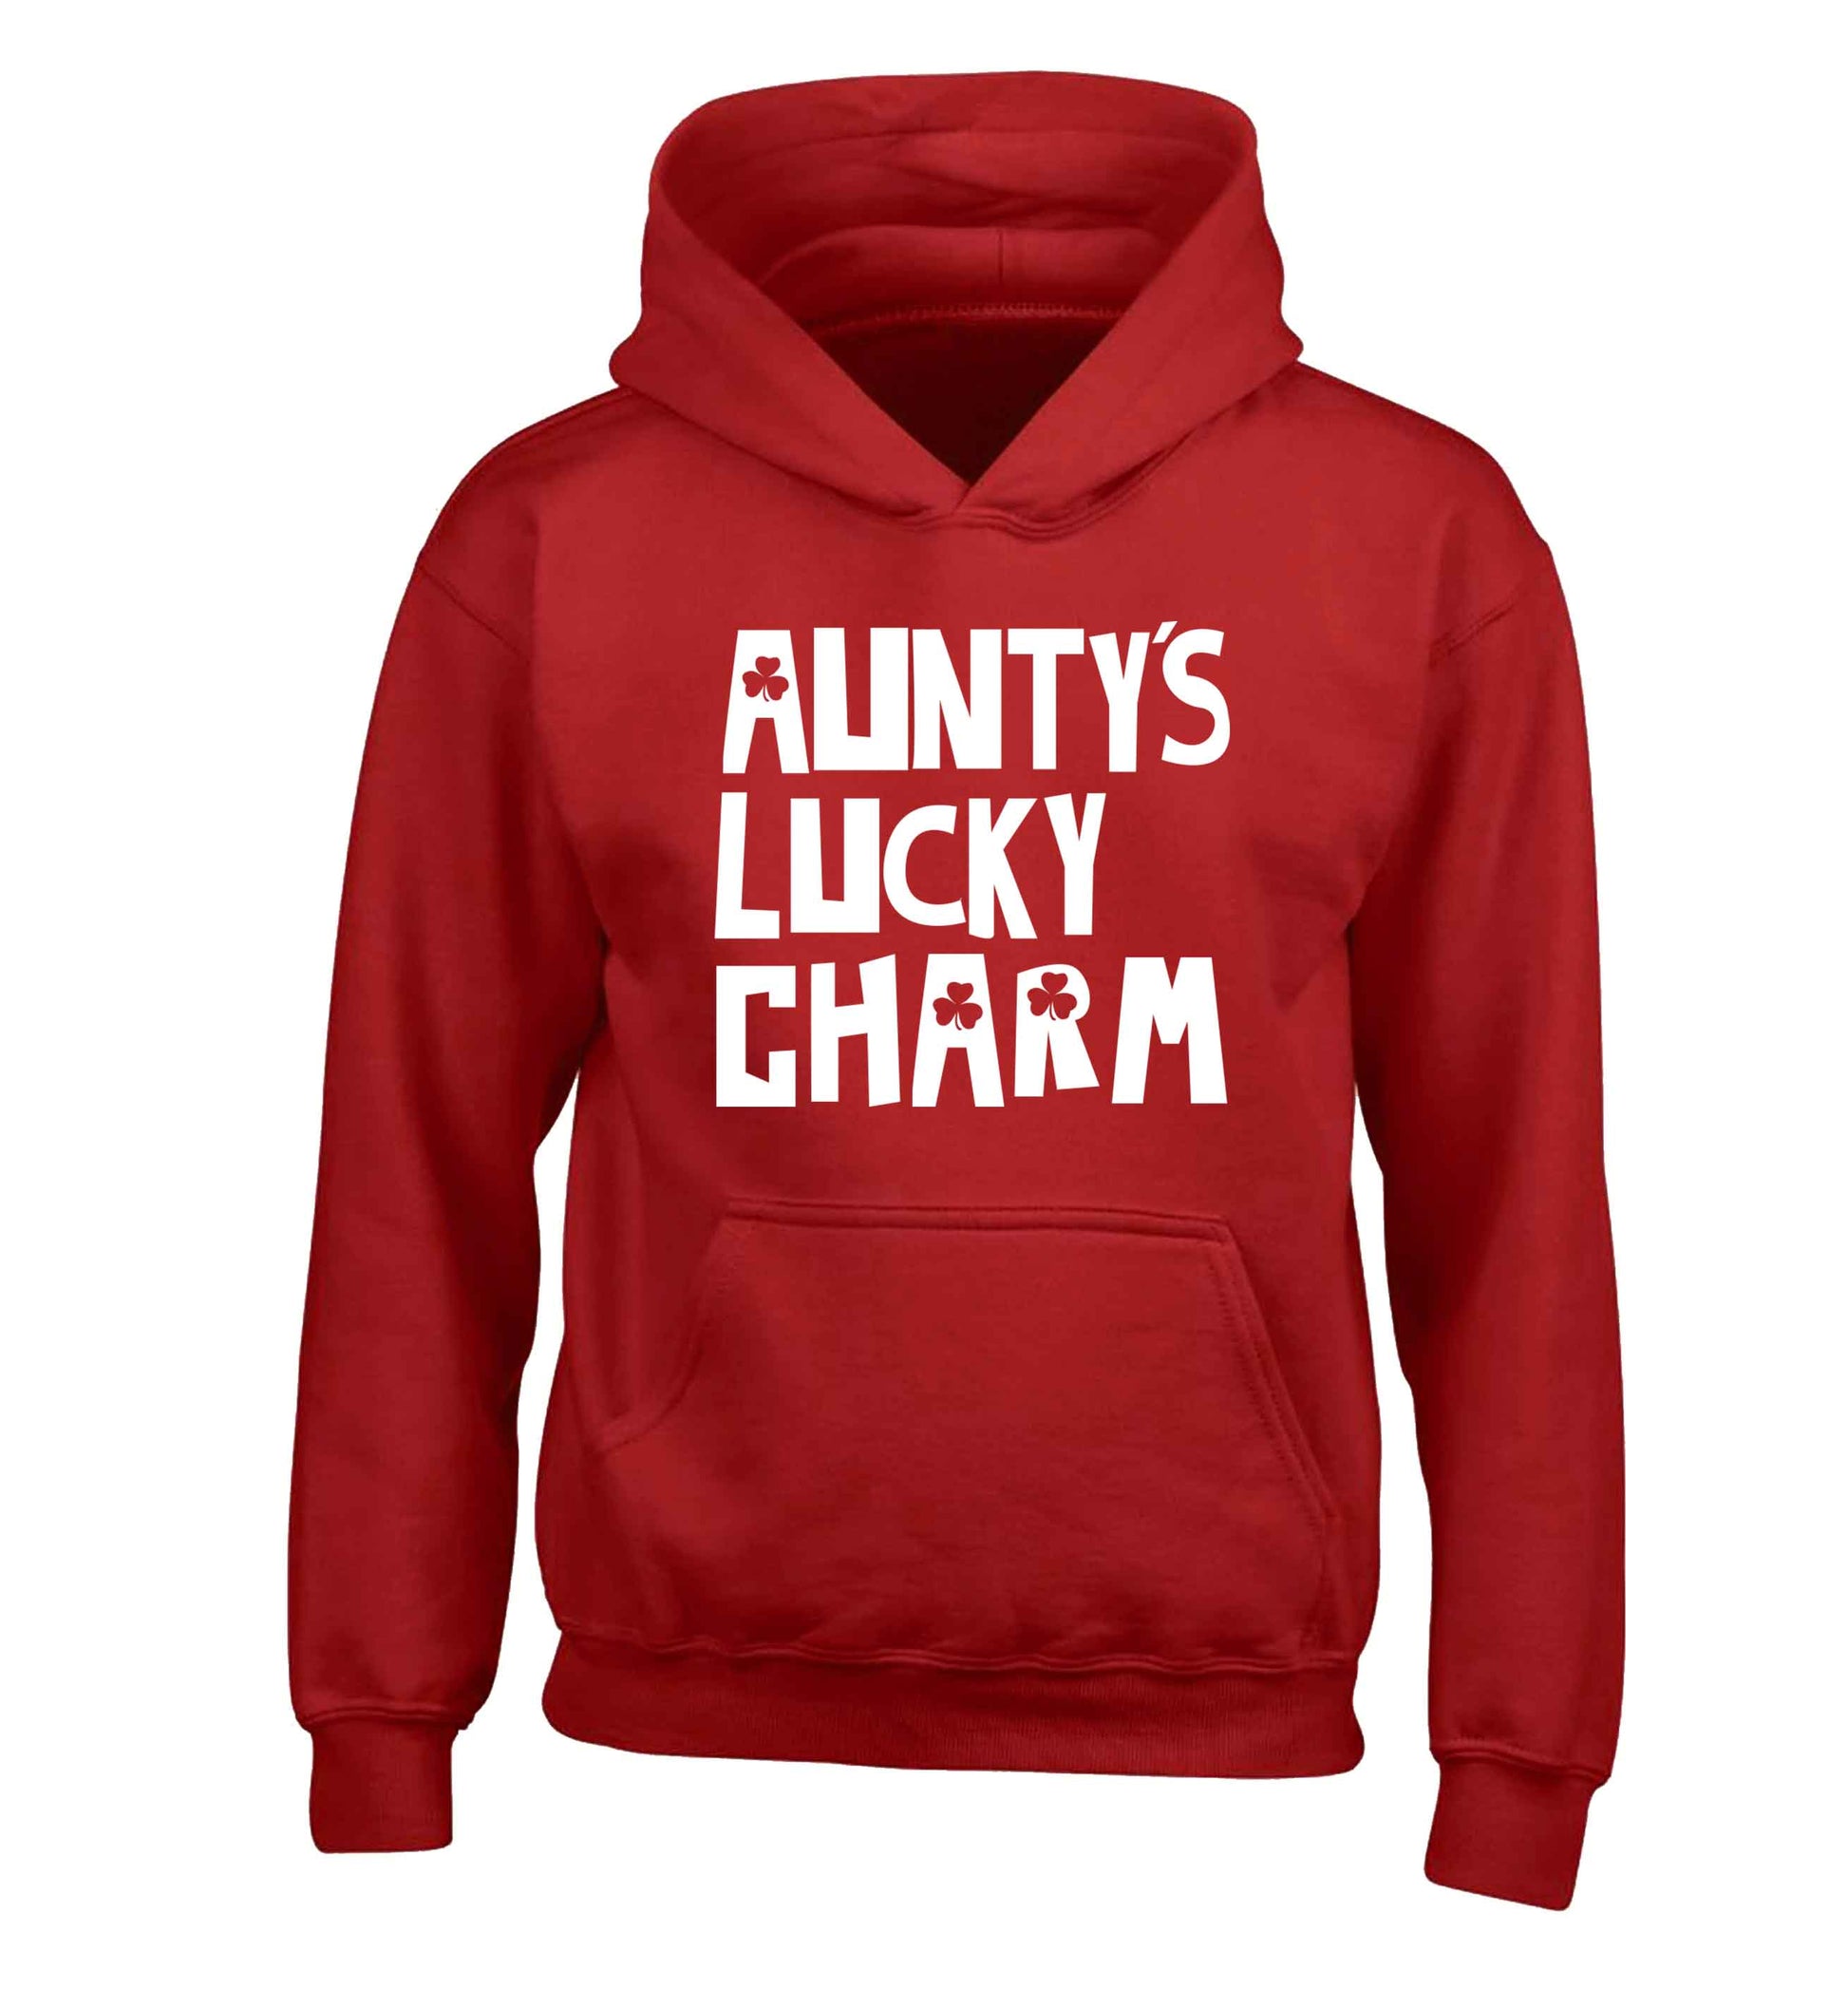 Aunty's lucky charm children's red hoodie 12-13 Years